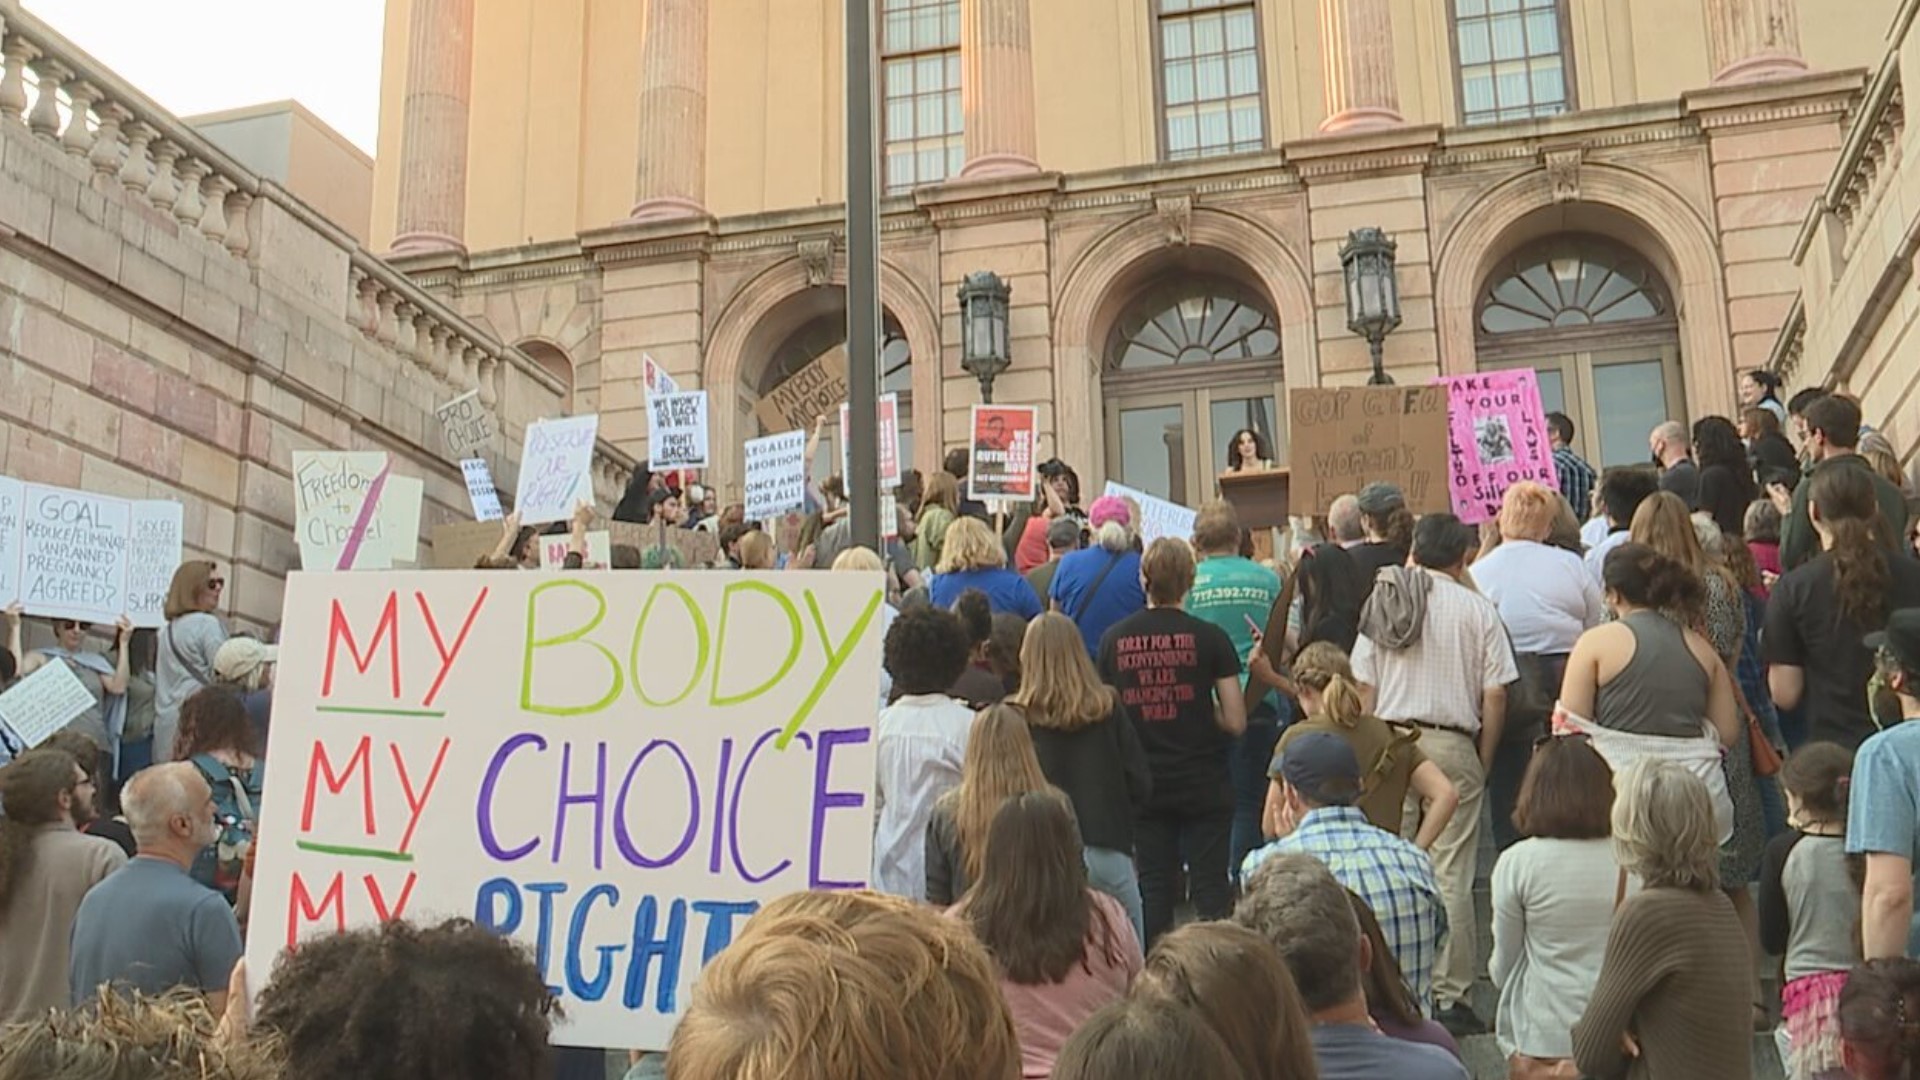 Members of the community gathered in Lancaster to voice their support for abortion rights.